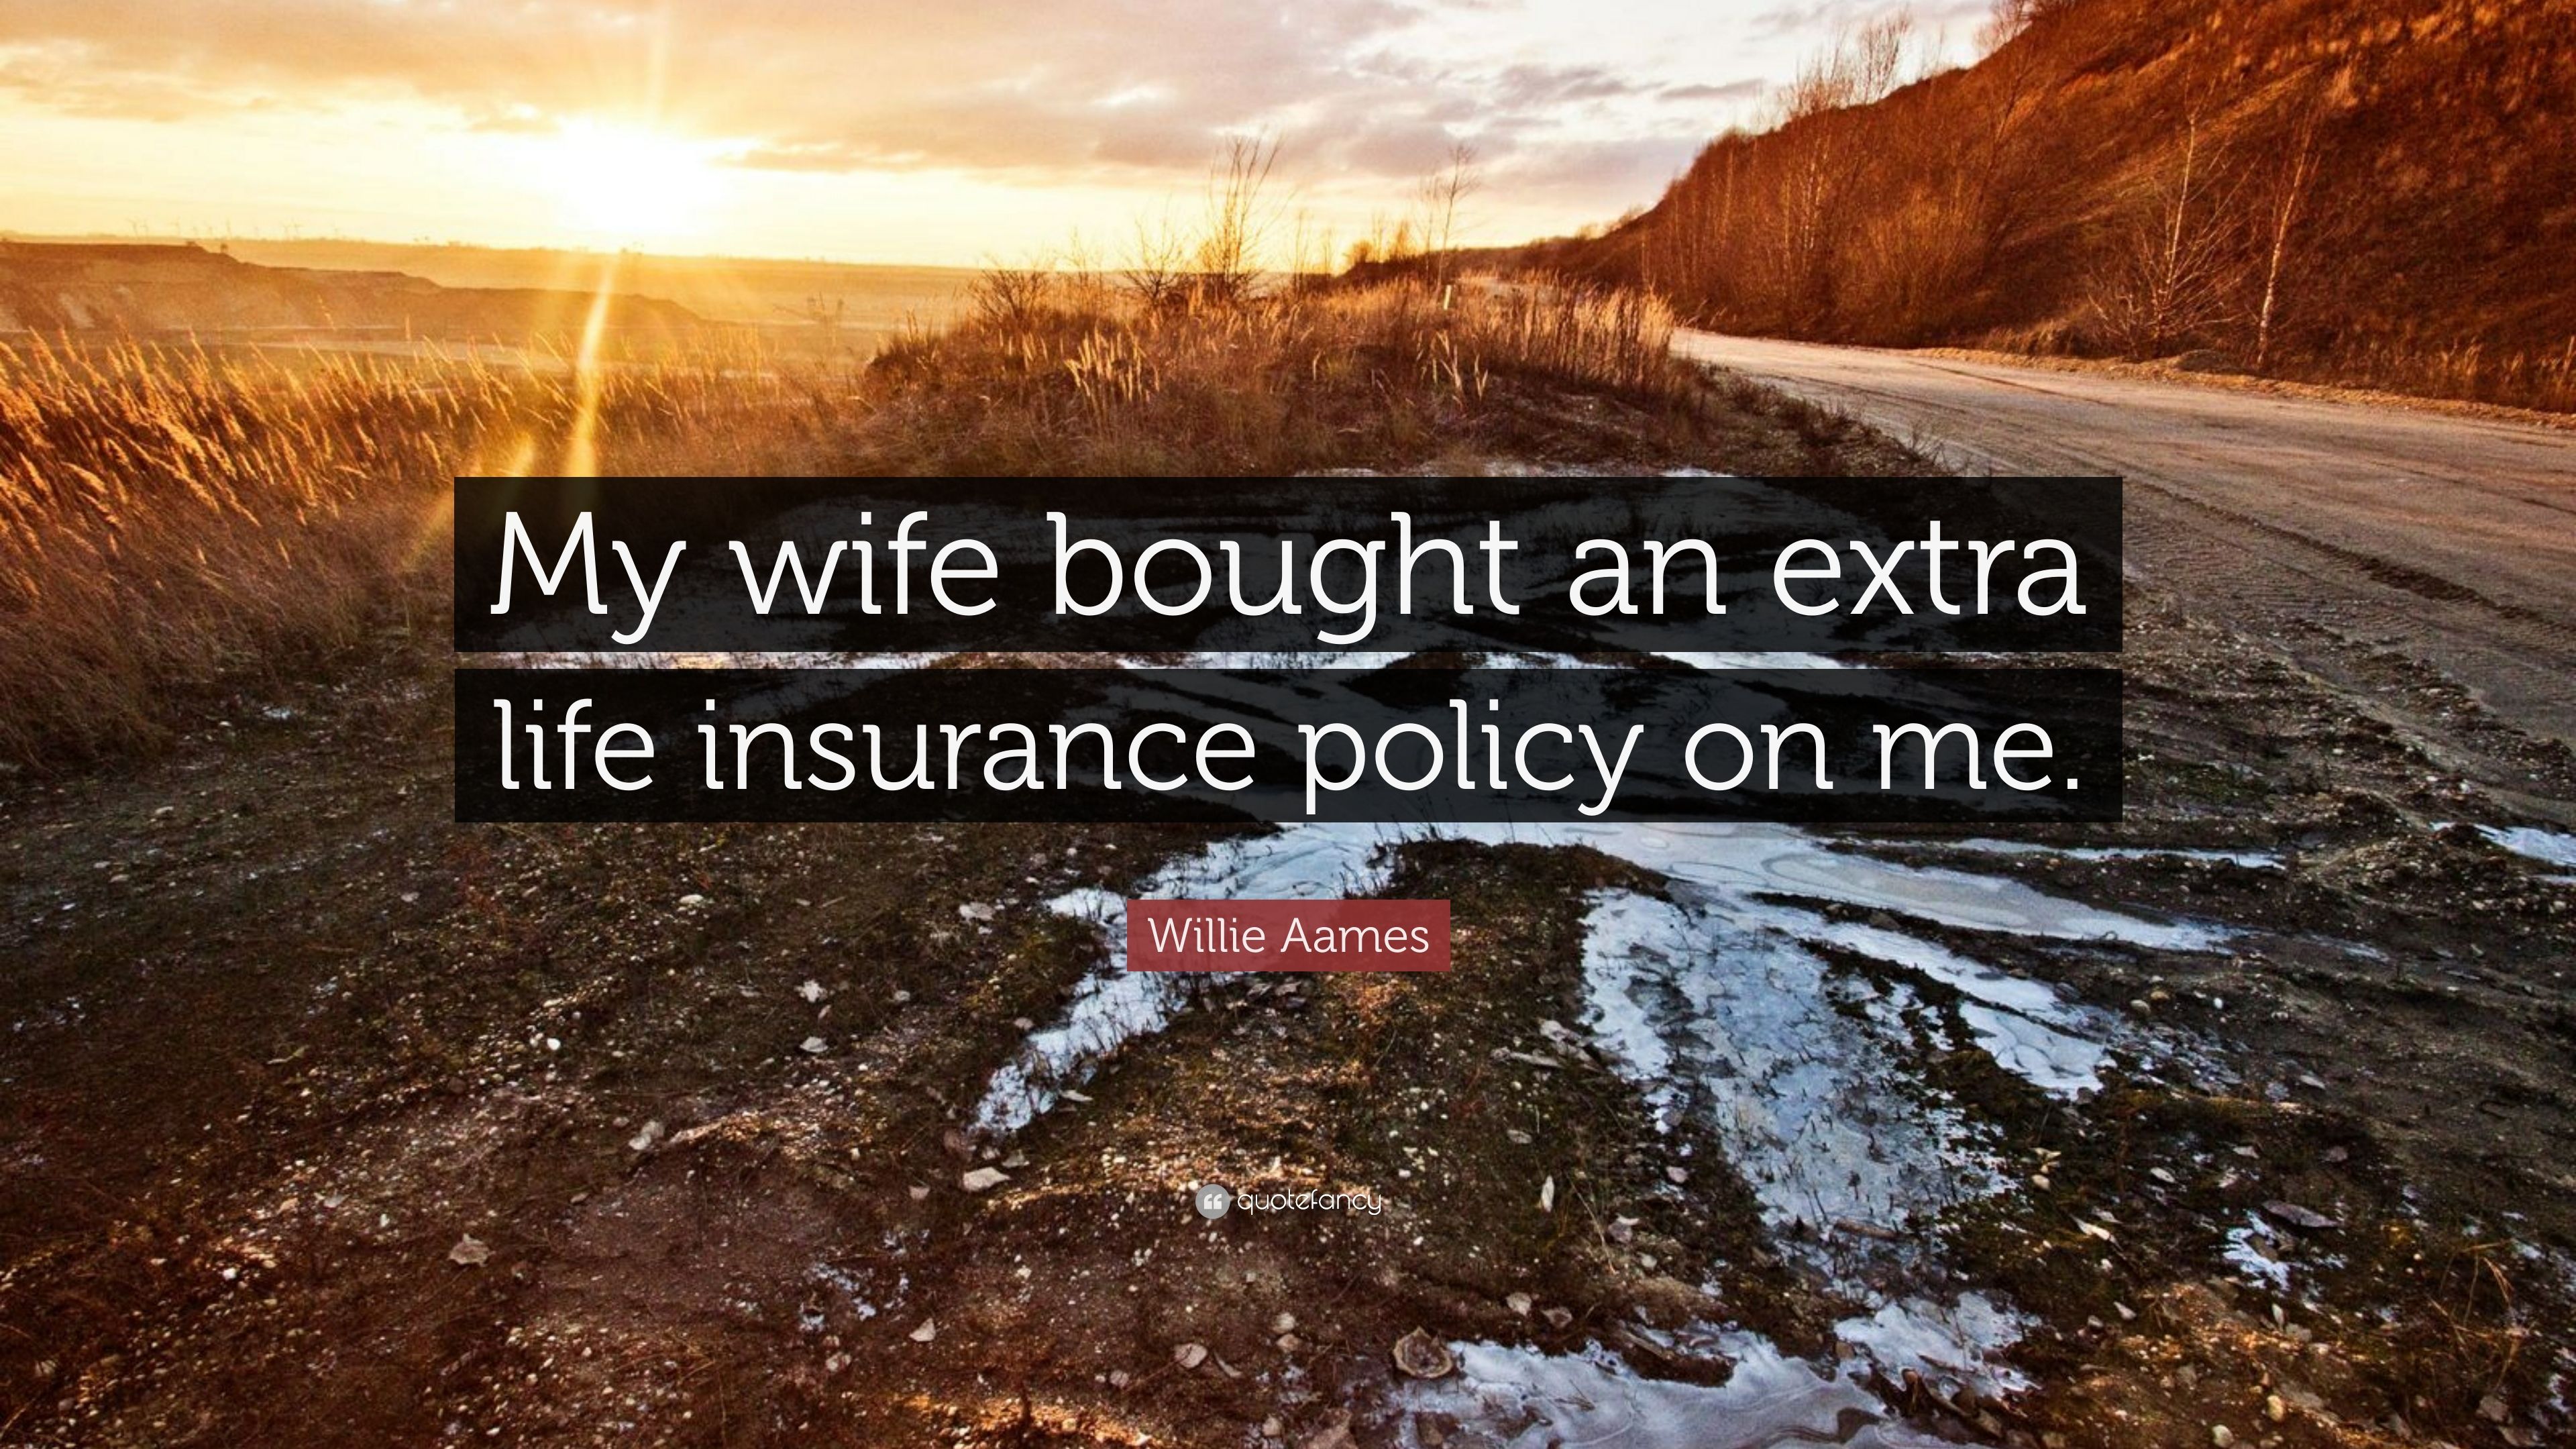 Willie Aames Quote: “My wife bought an extra life insurance policy